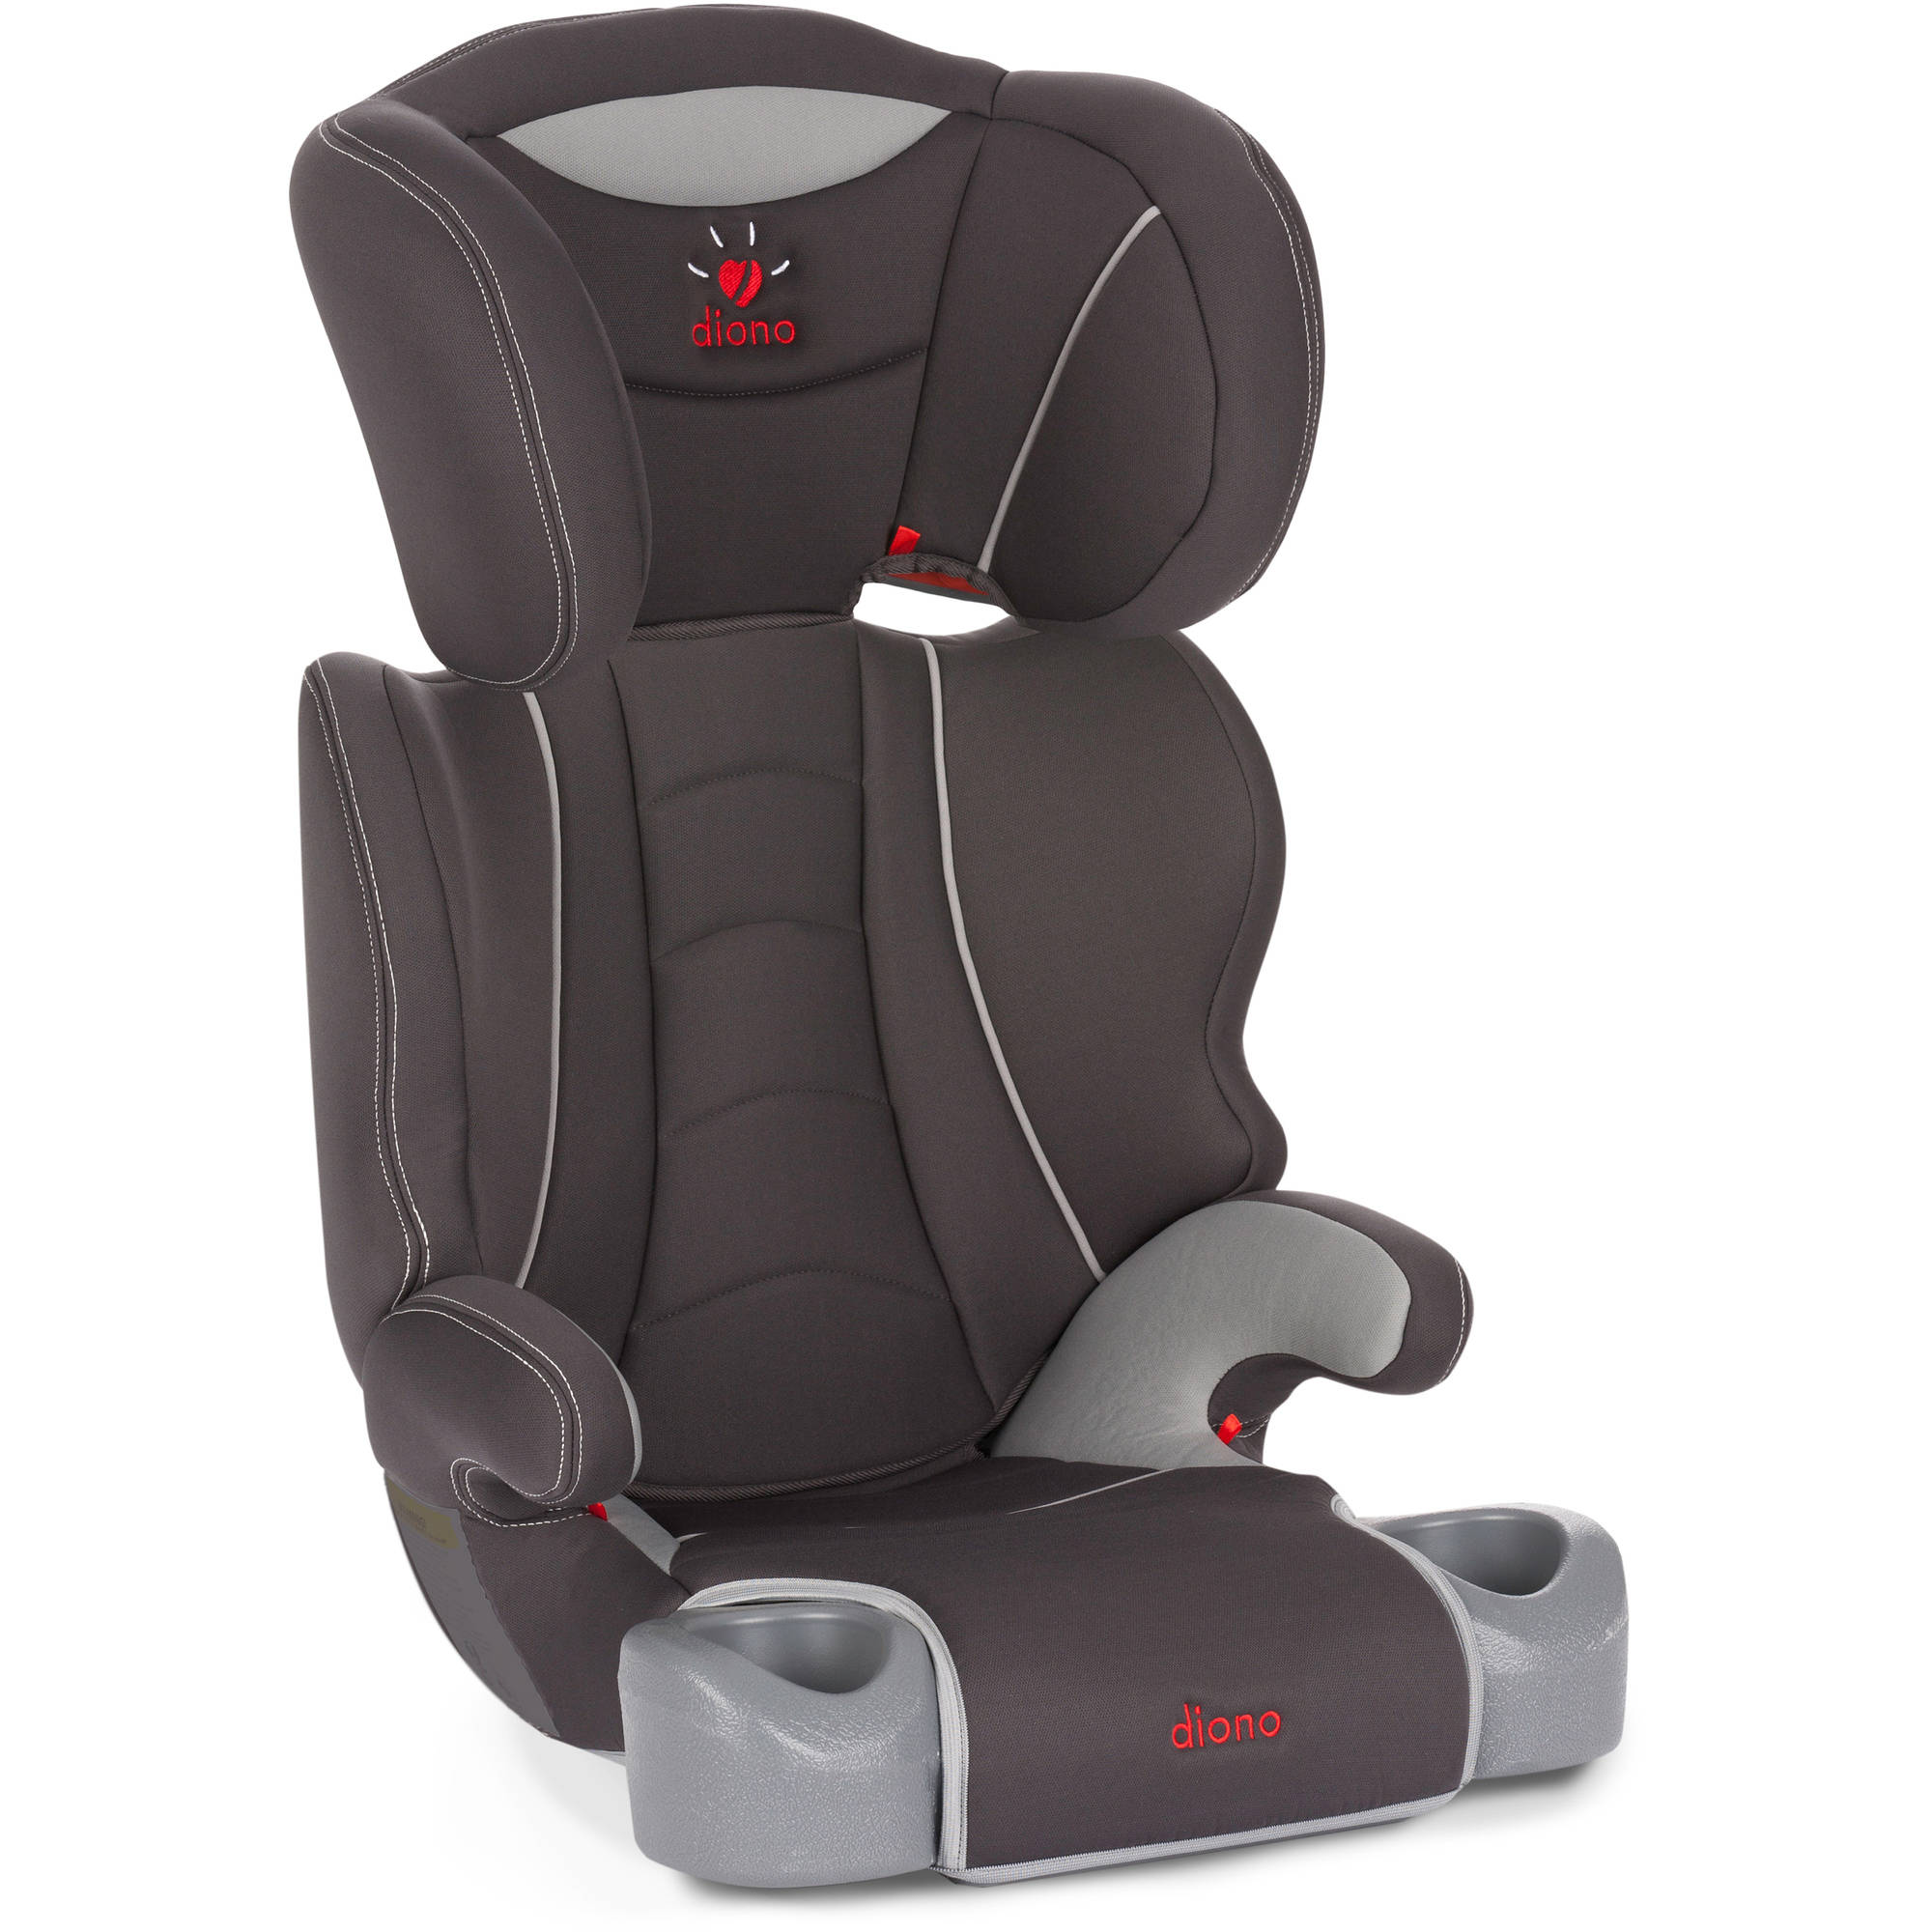 diono hip high back booster car seat with cup holders, slate - image 1 of 4